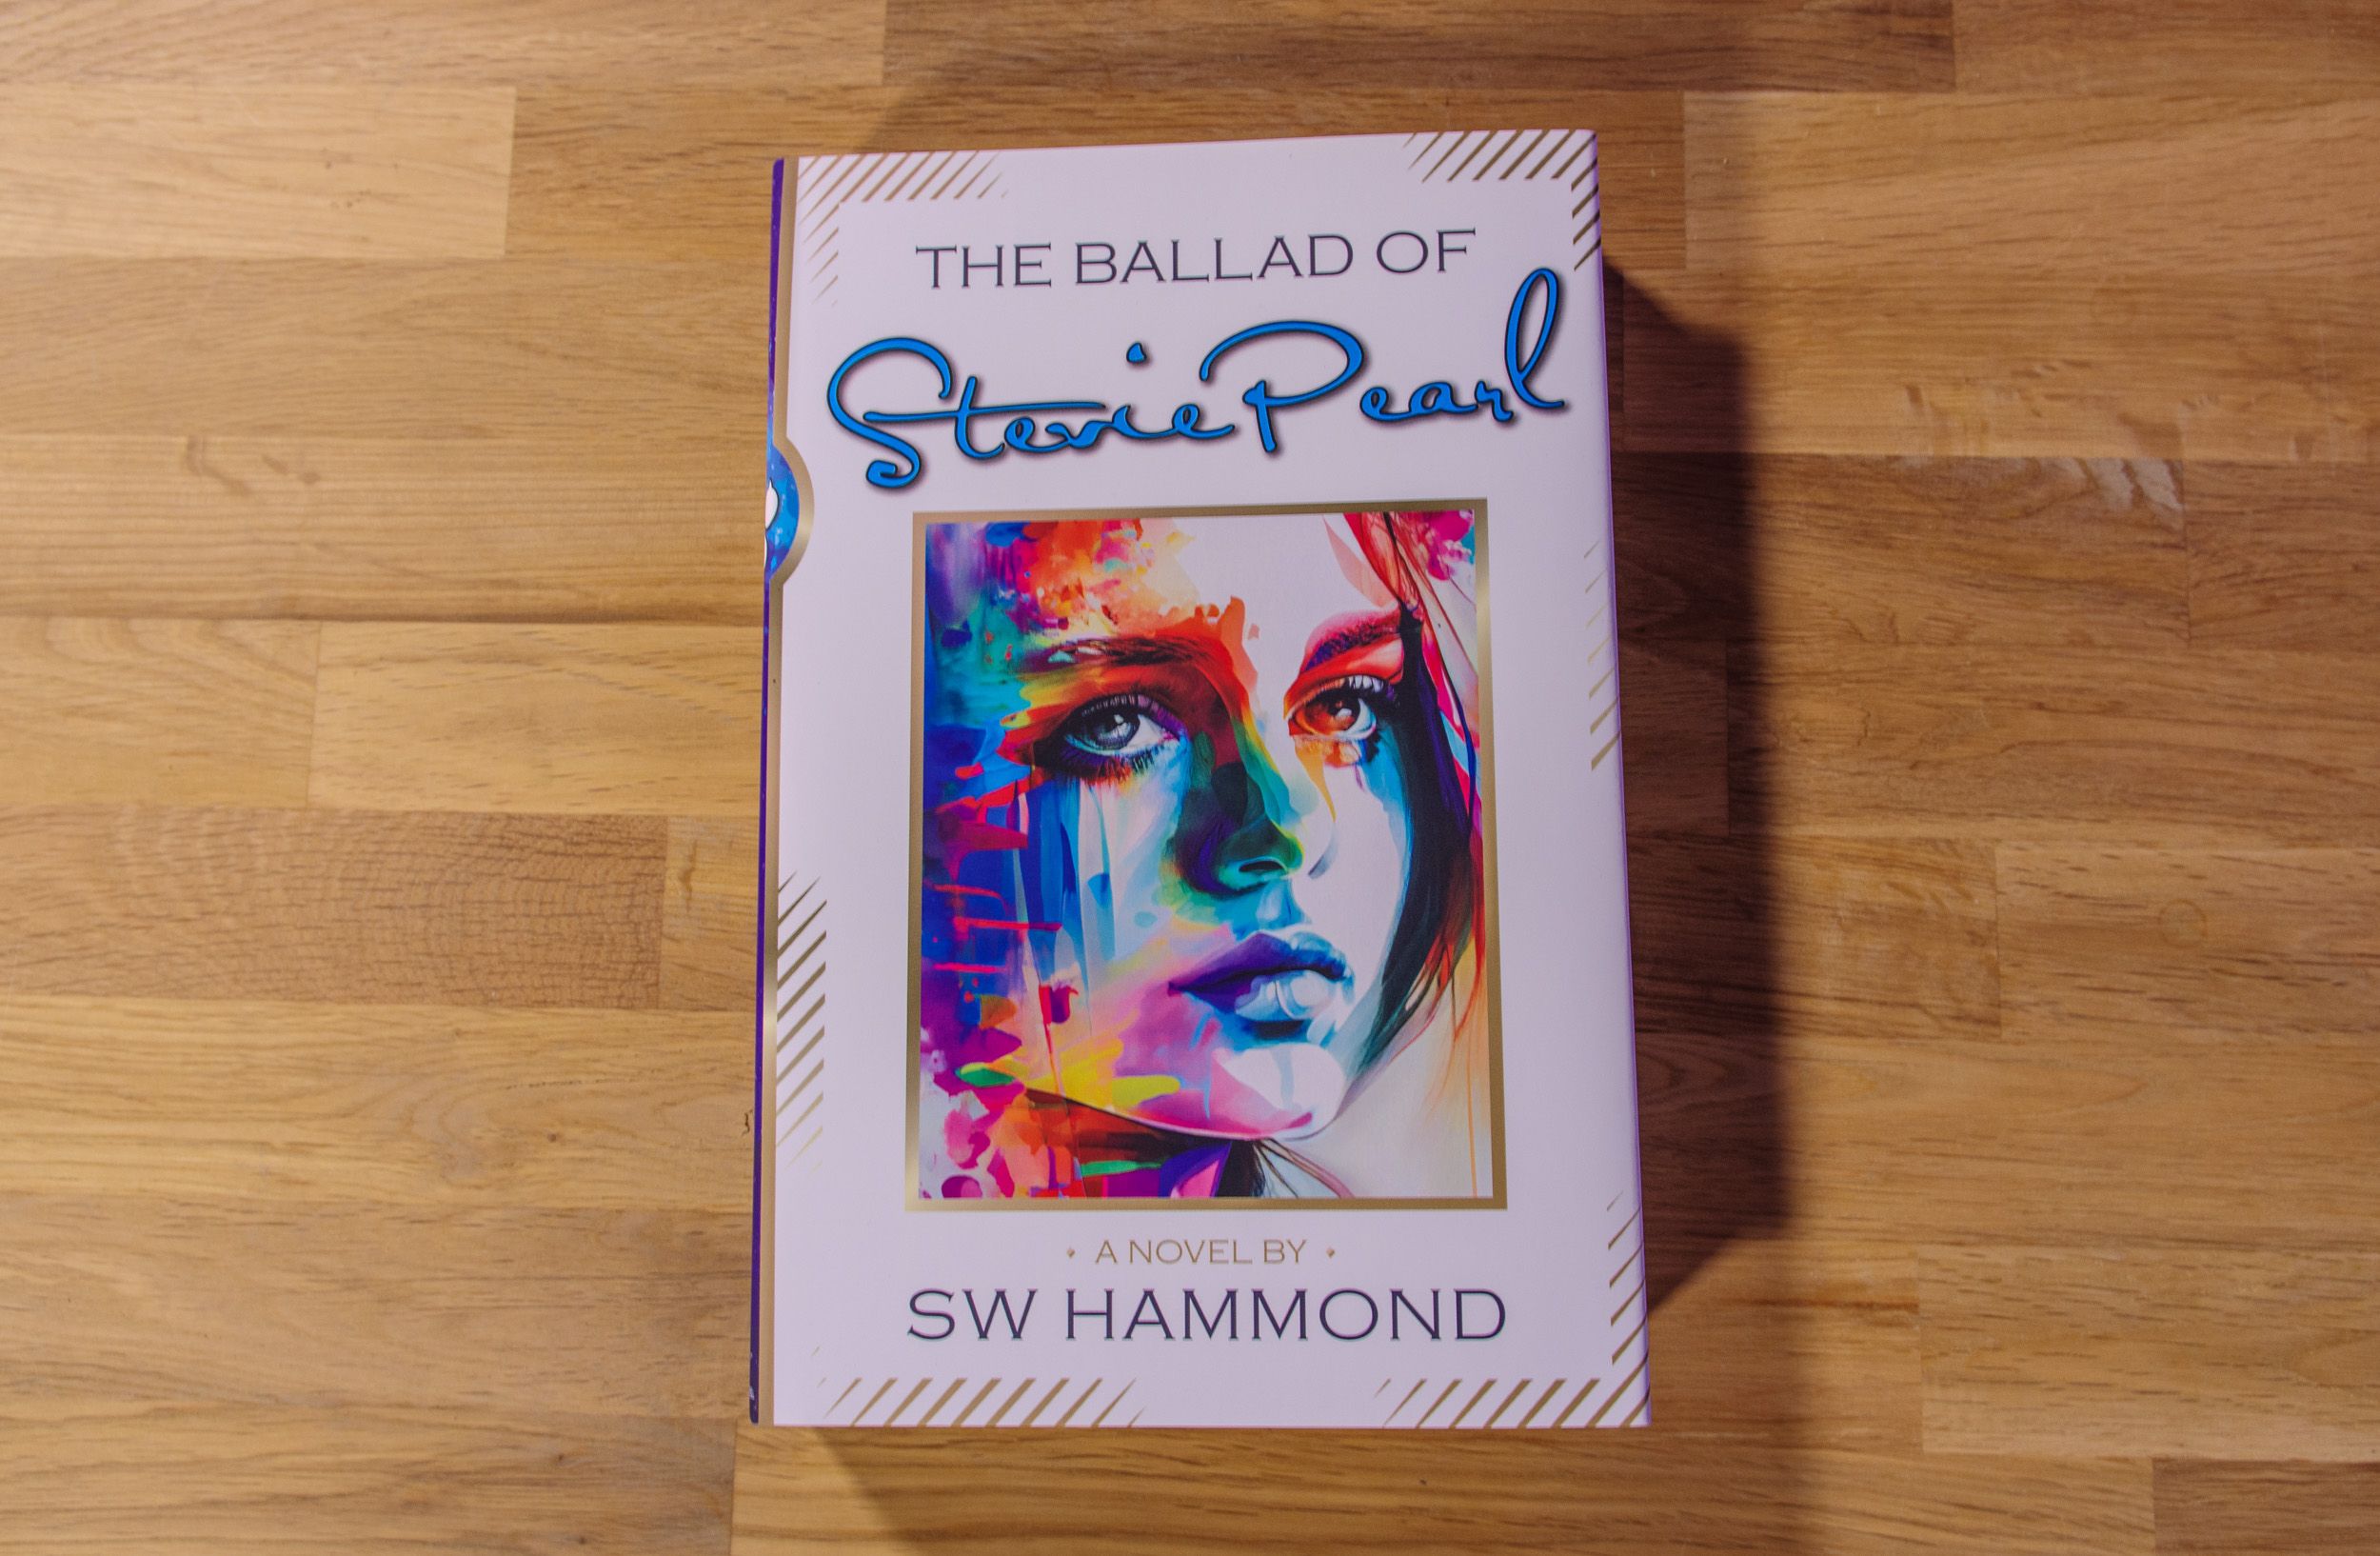 Photograph of the cover of The Ballad of Stevie Pearl.